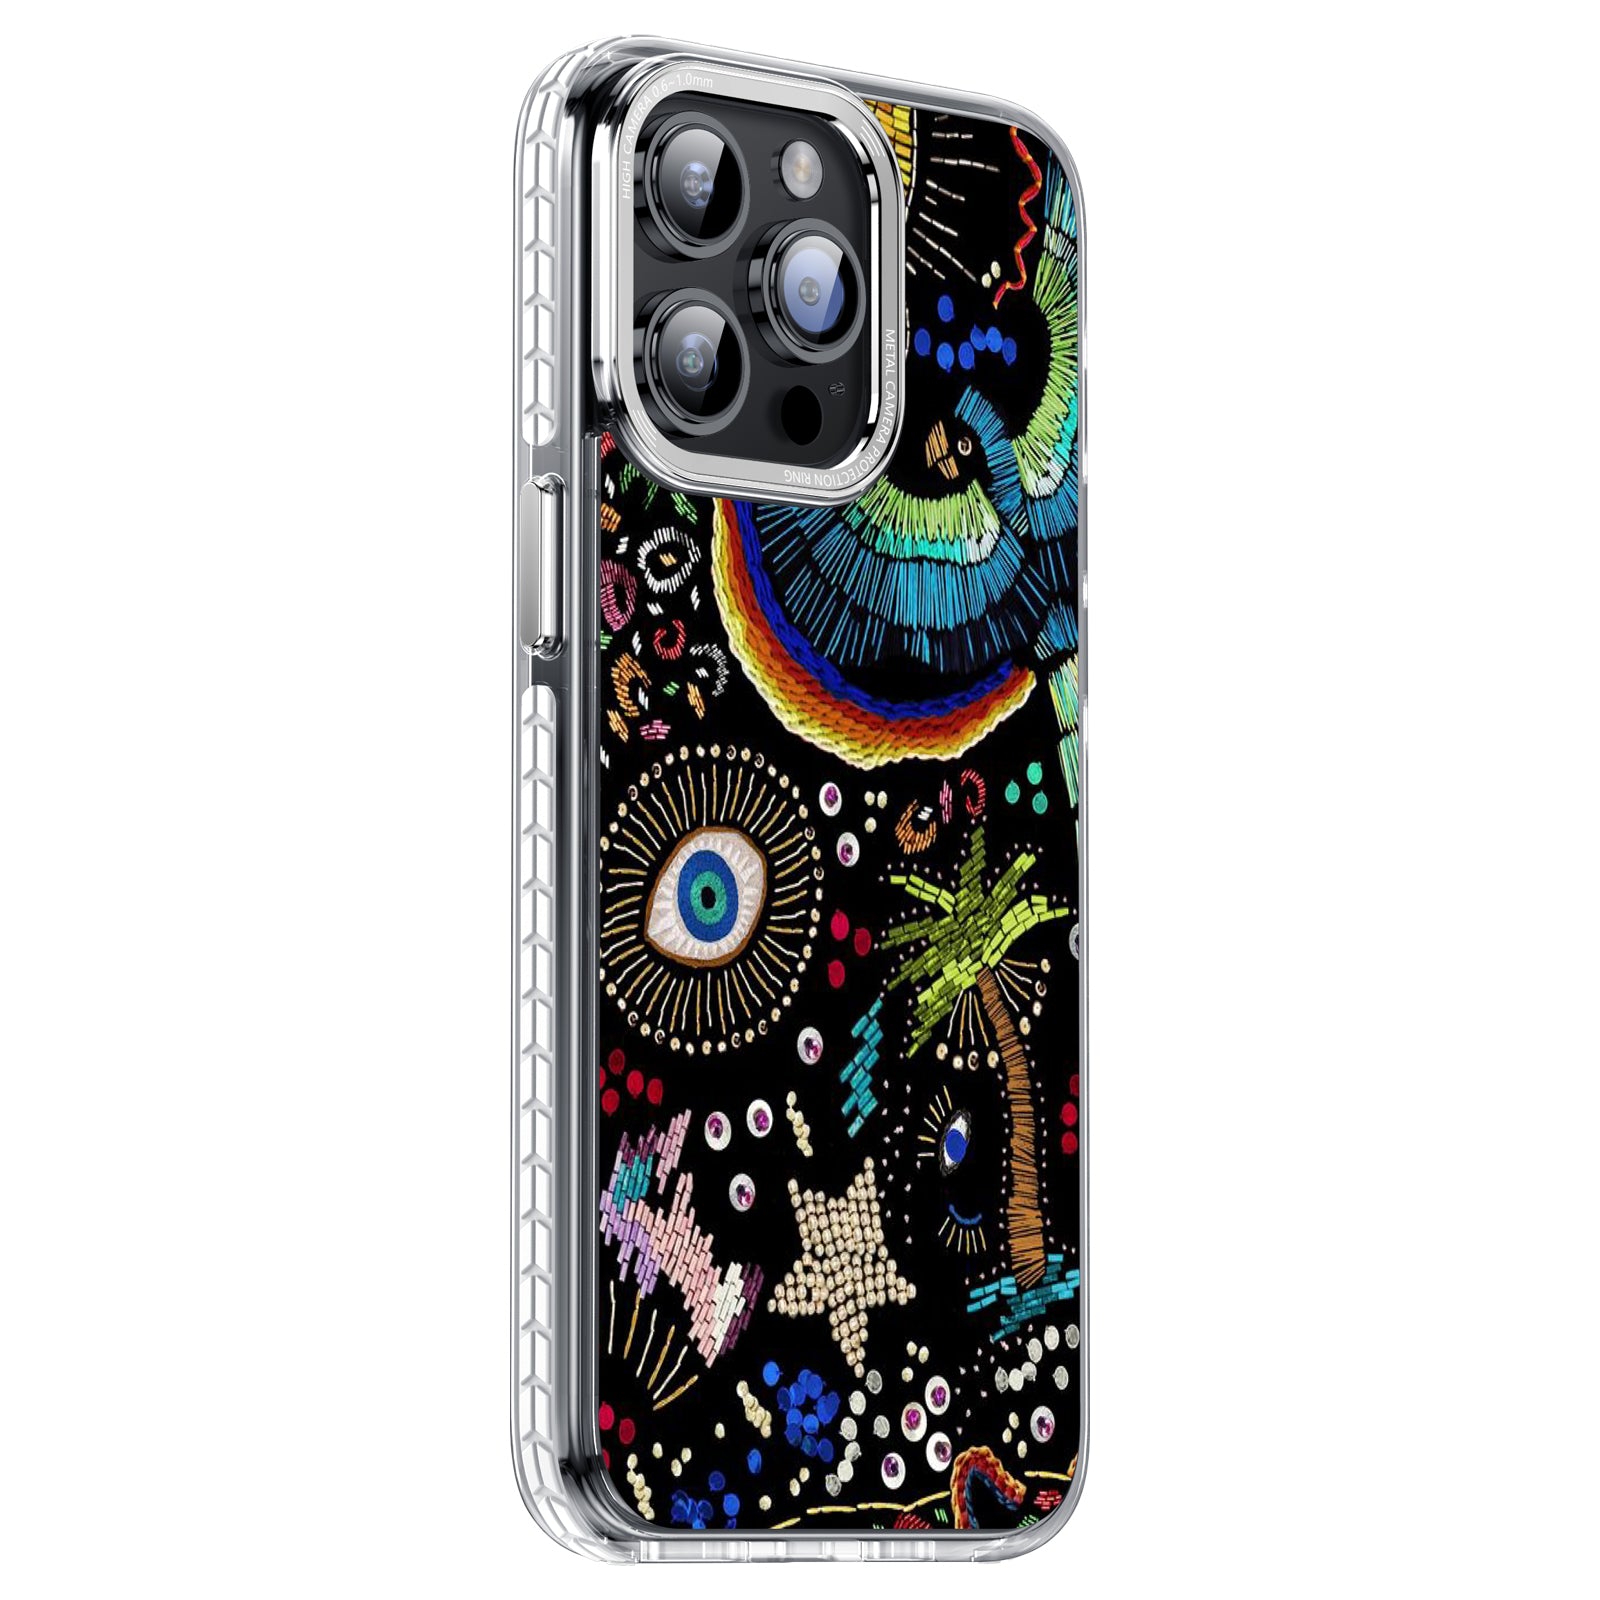 Geek Case with Dragon Pattern With Glitter Pattern